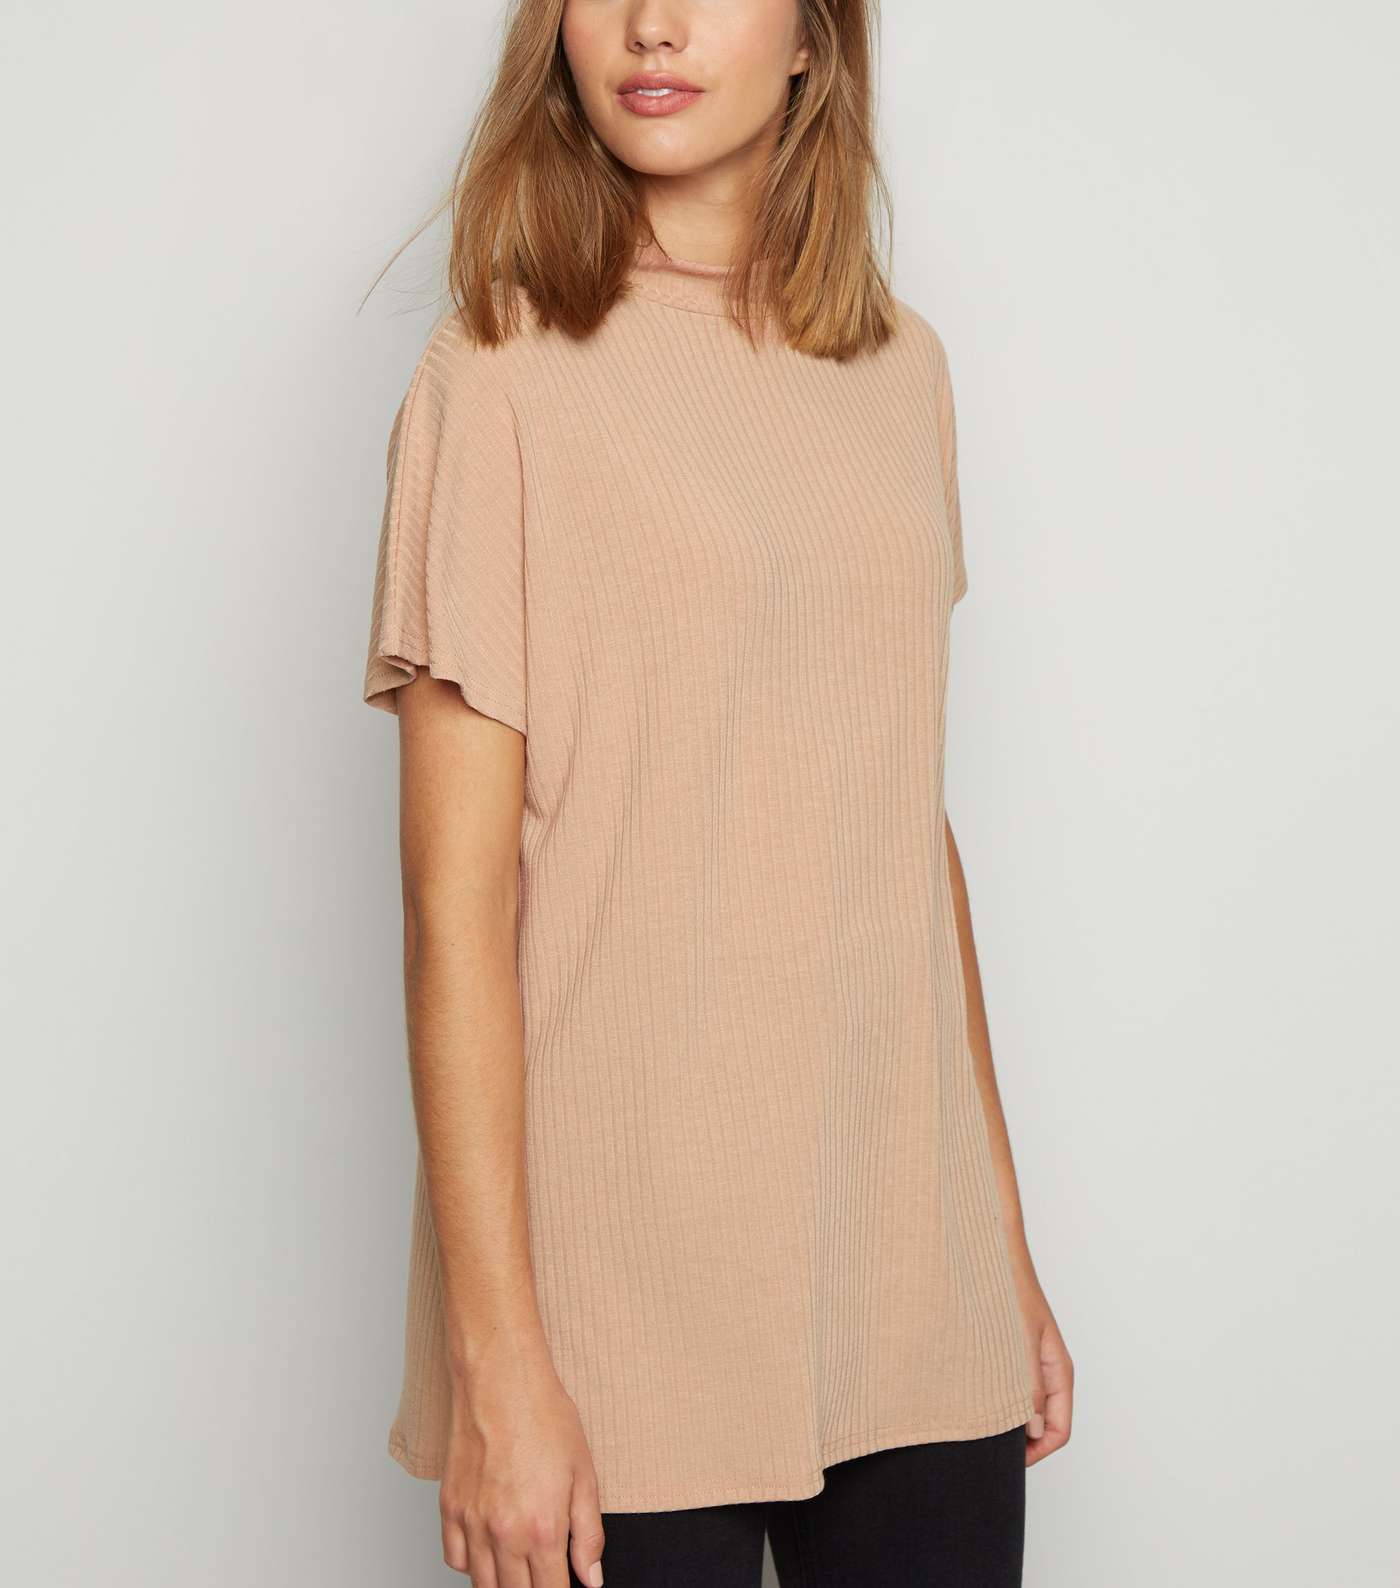 Camel Super Soft Ribbed Tunic Top